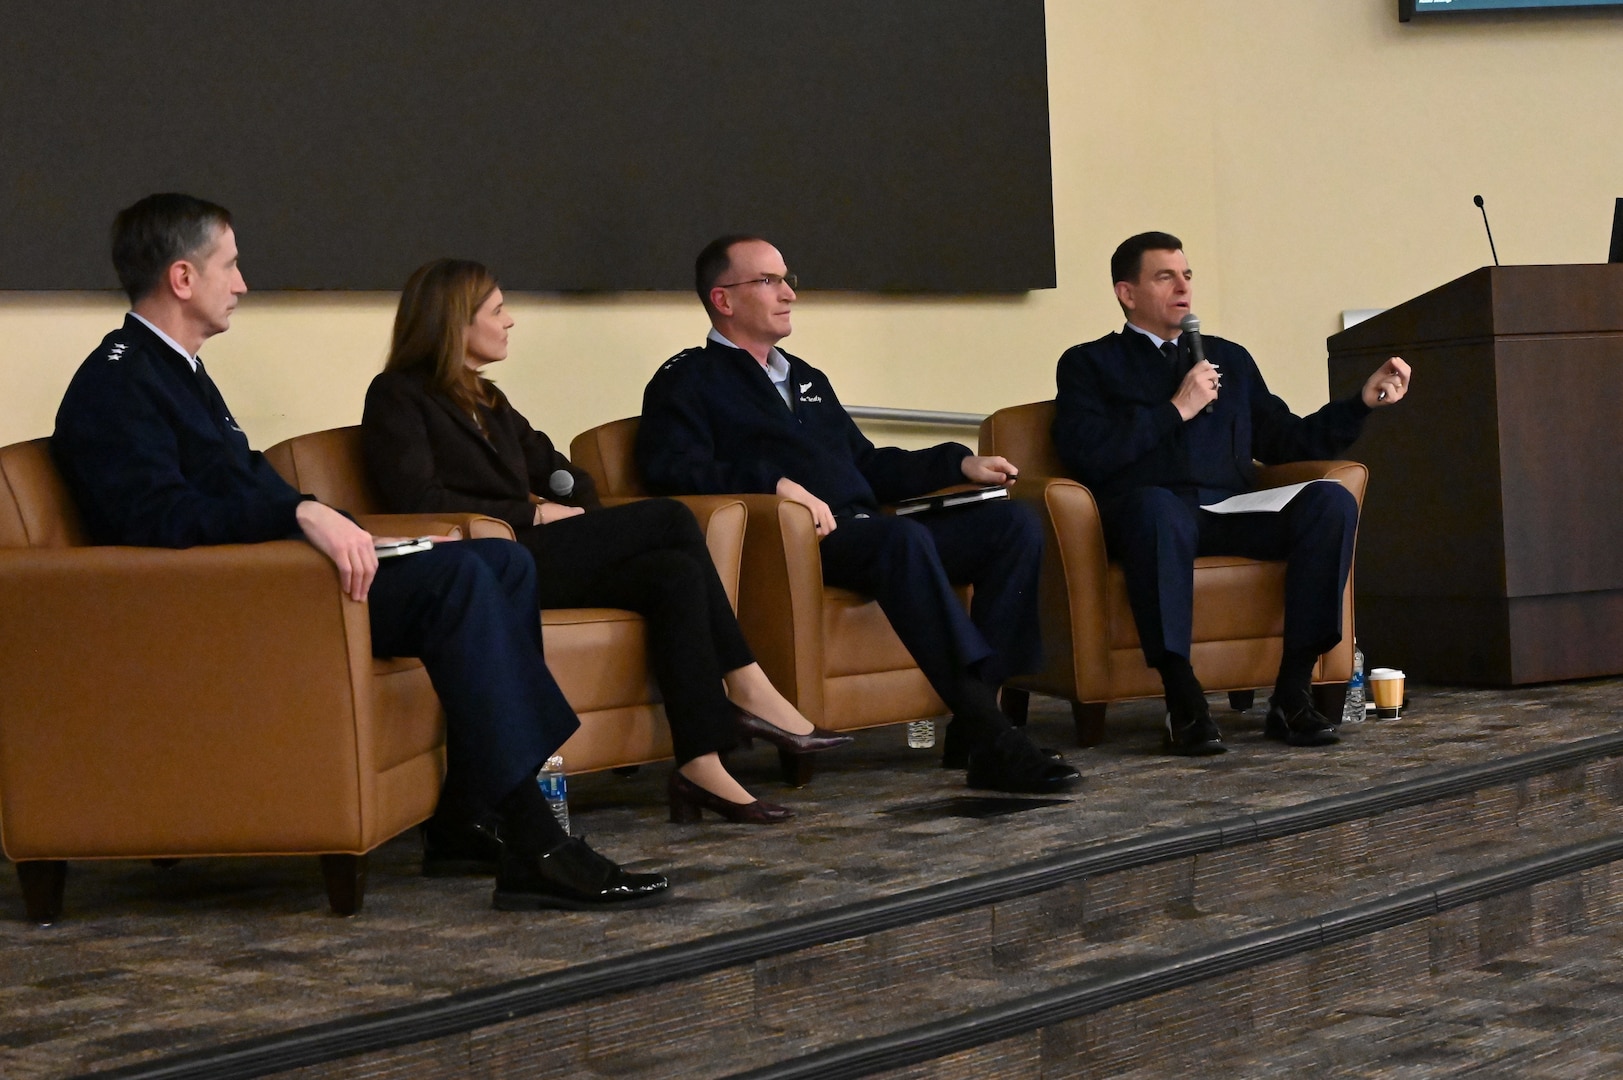 From left: U.S. Air Force Lt. Gen. Kevin Schneider, director of staff, Air Force; Katharine Kelley, deputy chief of Space operations for human capital; Lt. Gen. John Healy, chief, Air Force Reserve, and Lt. Gen. Michael Loh, director, Air National Guard, field questions during the 2023 Total Force Symposium at Joint Base Andrews, Maryland, March 15, 2023.